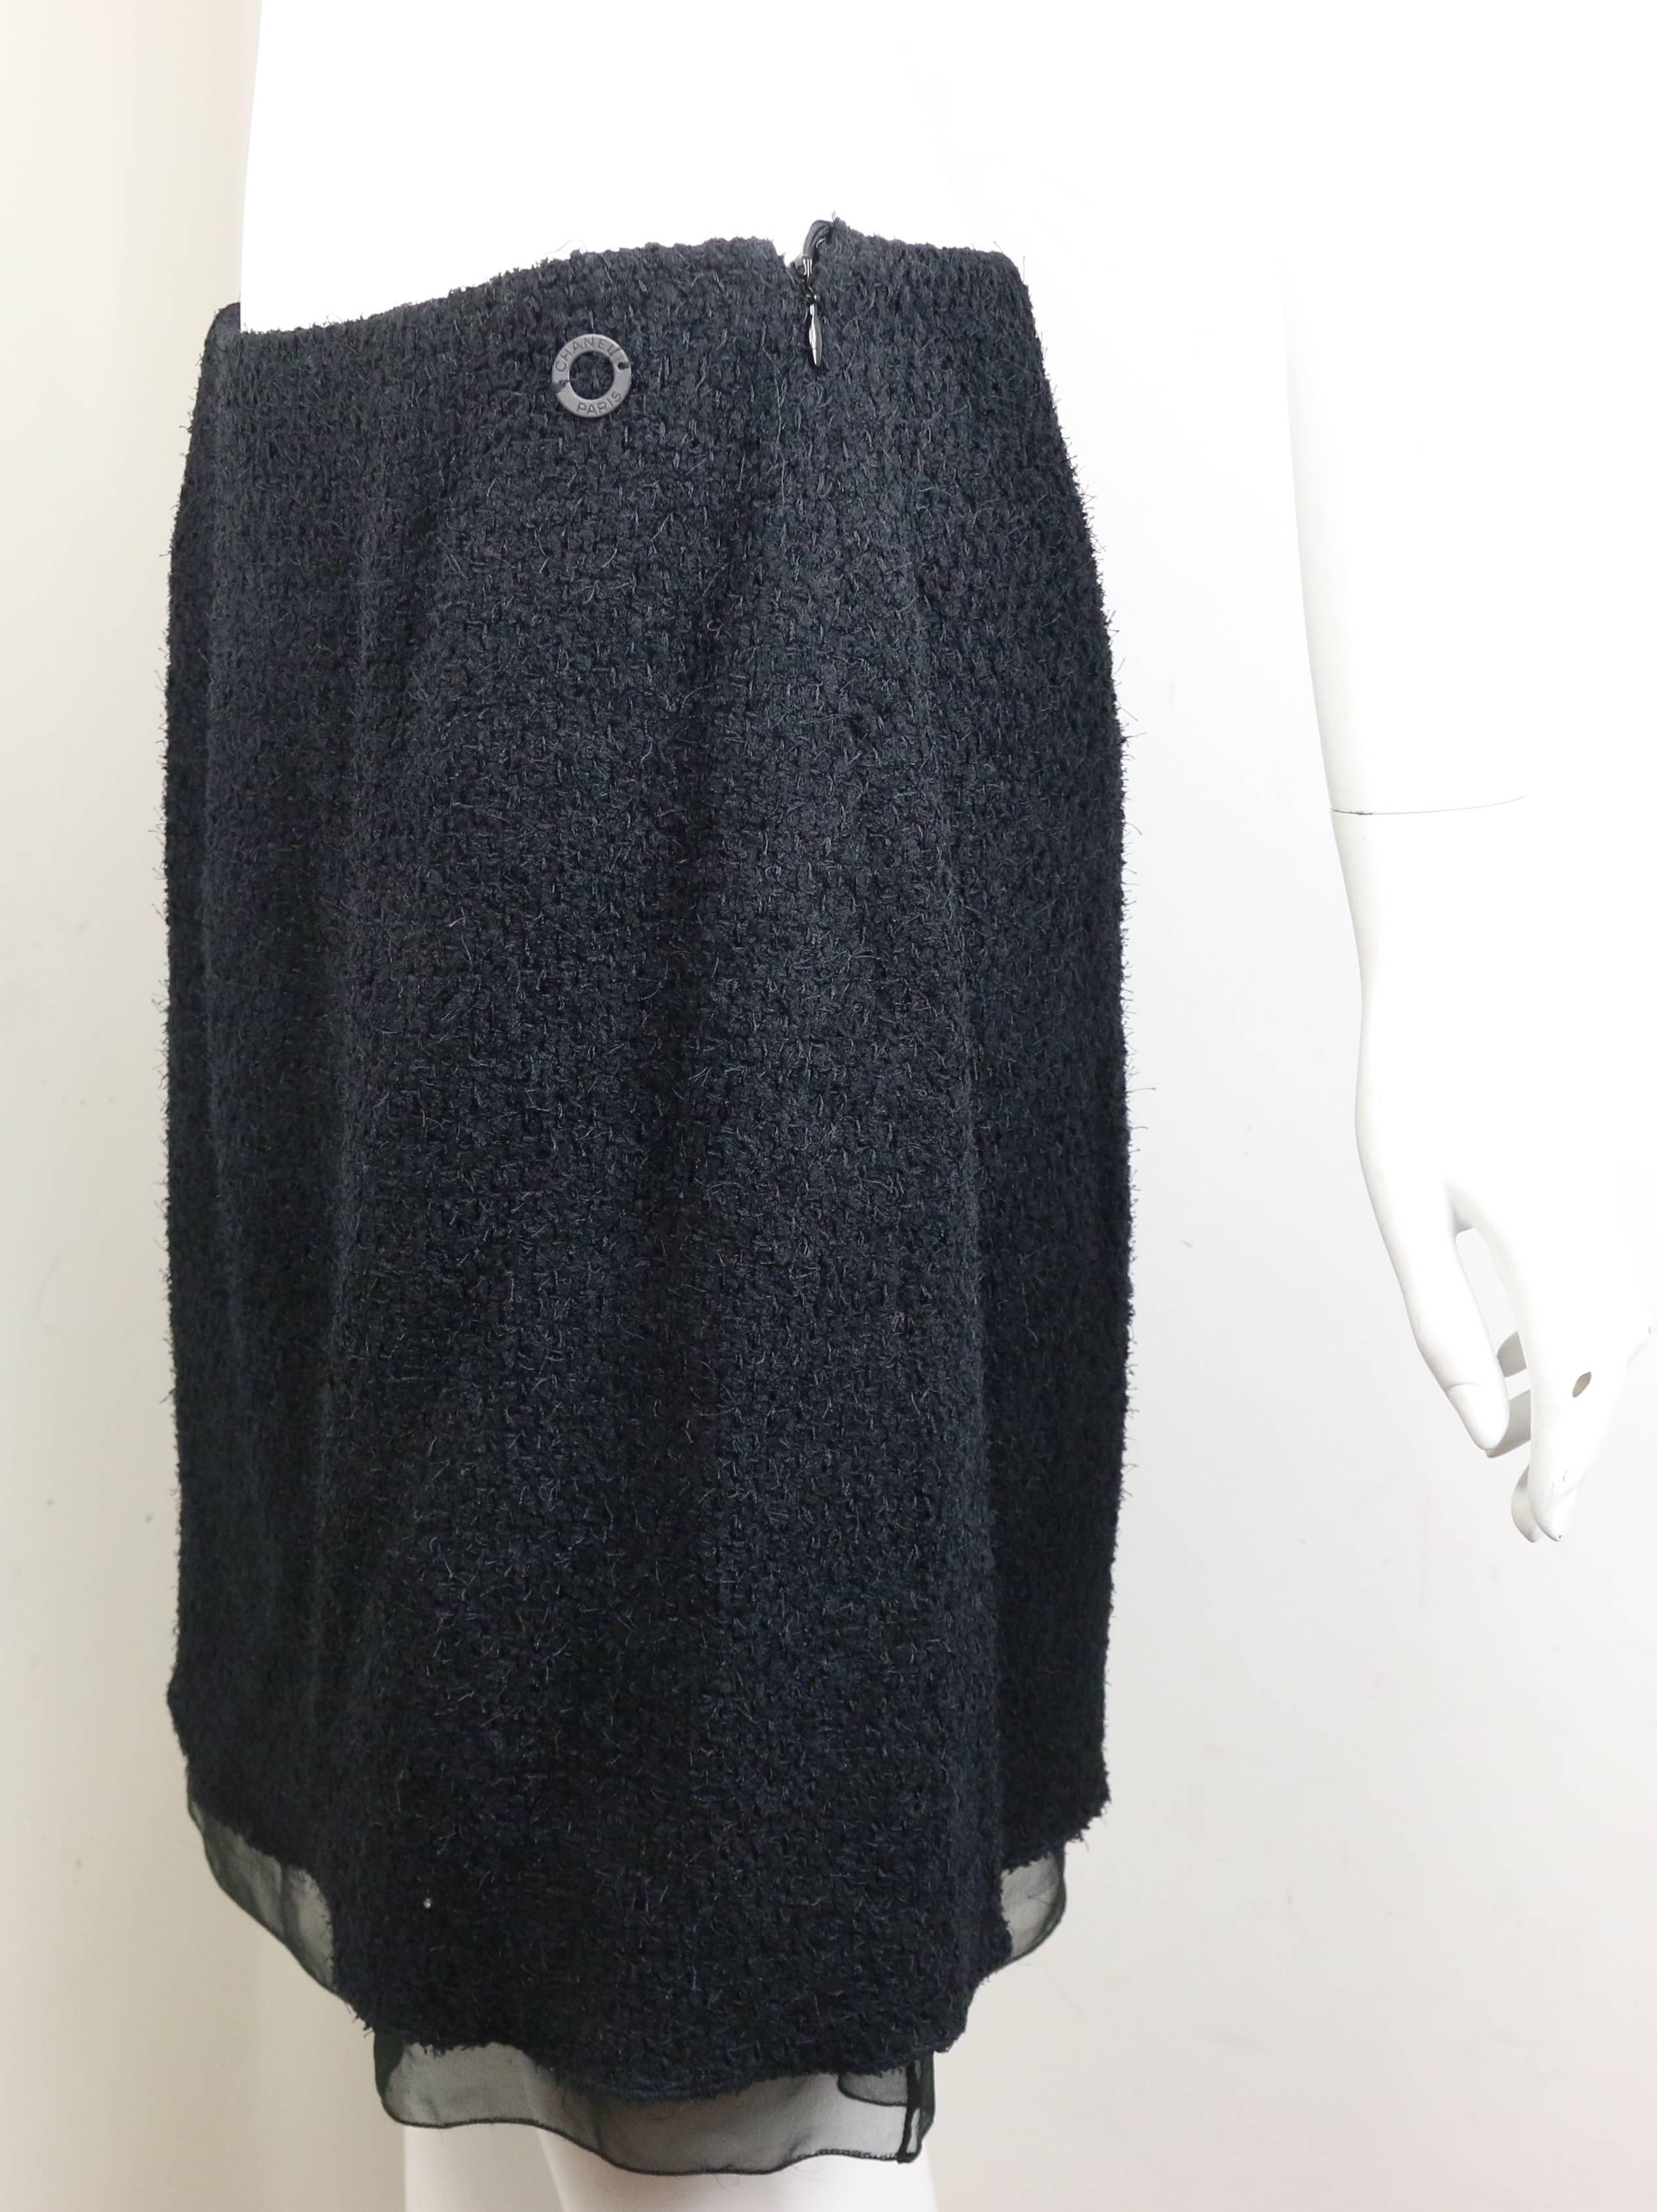 Chanel Black Nylon/Wood Tweed Jacket and Skirt Ensemble with Silk Extension  For Sale 4